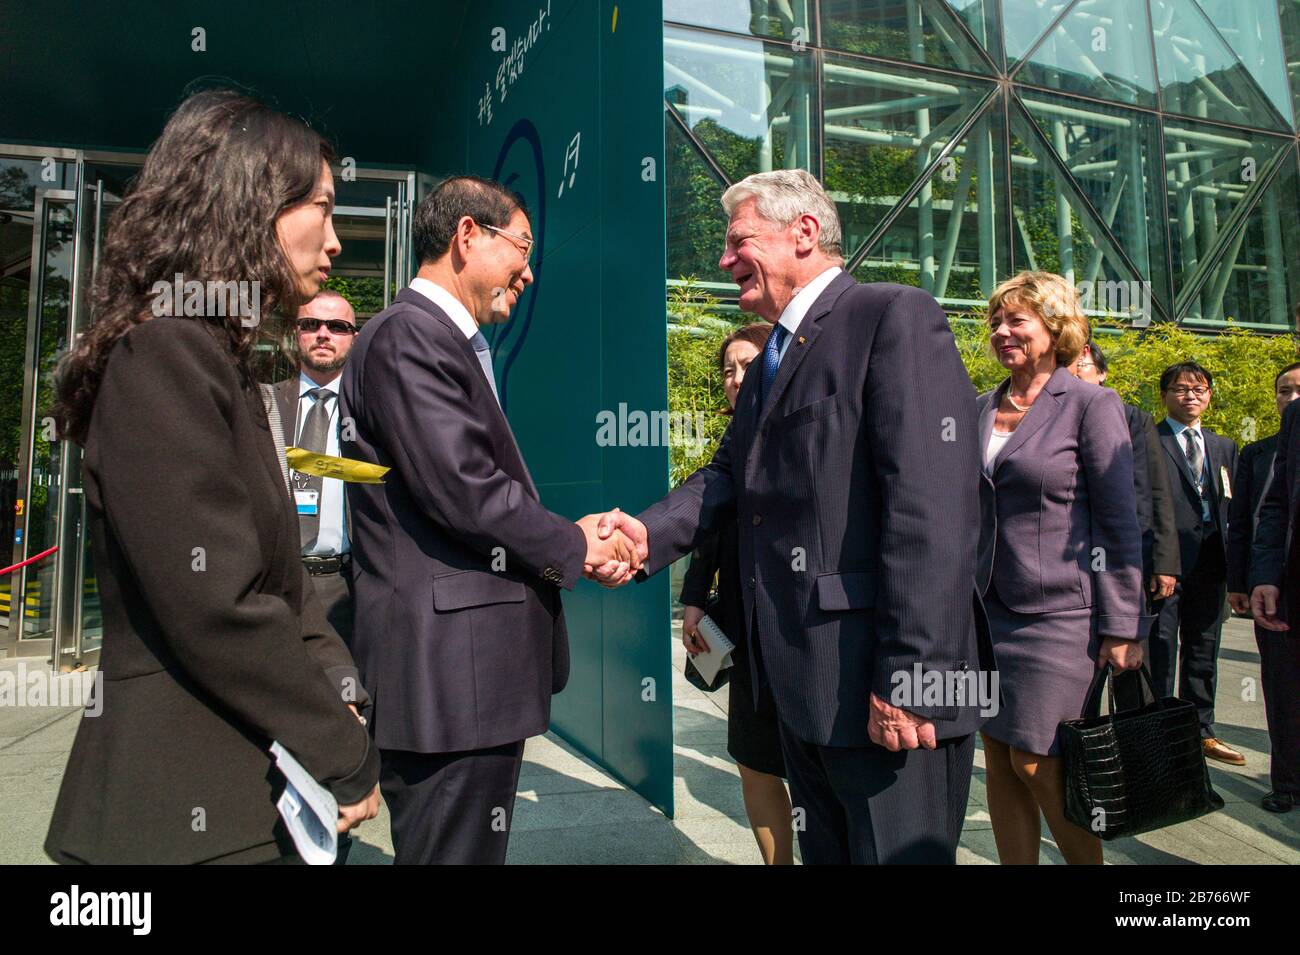 South Korea, Seoul, 13.10.2015. Visit of the German President in Seoul, South Korea on 13.10.2015. Arrival of the German President Joachim Gauck at the city hall of Seul. Park Won-soon (left), Mayor of Seoul and Joachim Gauck, German President. In the background, Ms. Daniela Schadt, journalist and life companion of the German President. [automated translation] Stock Photo